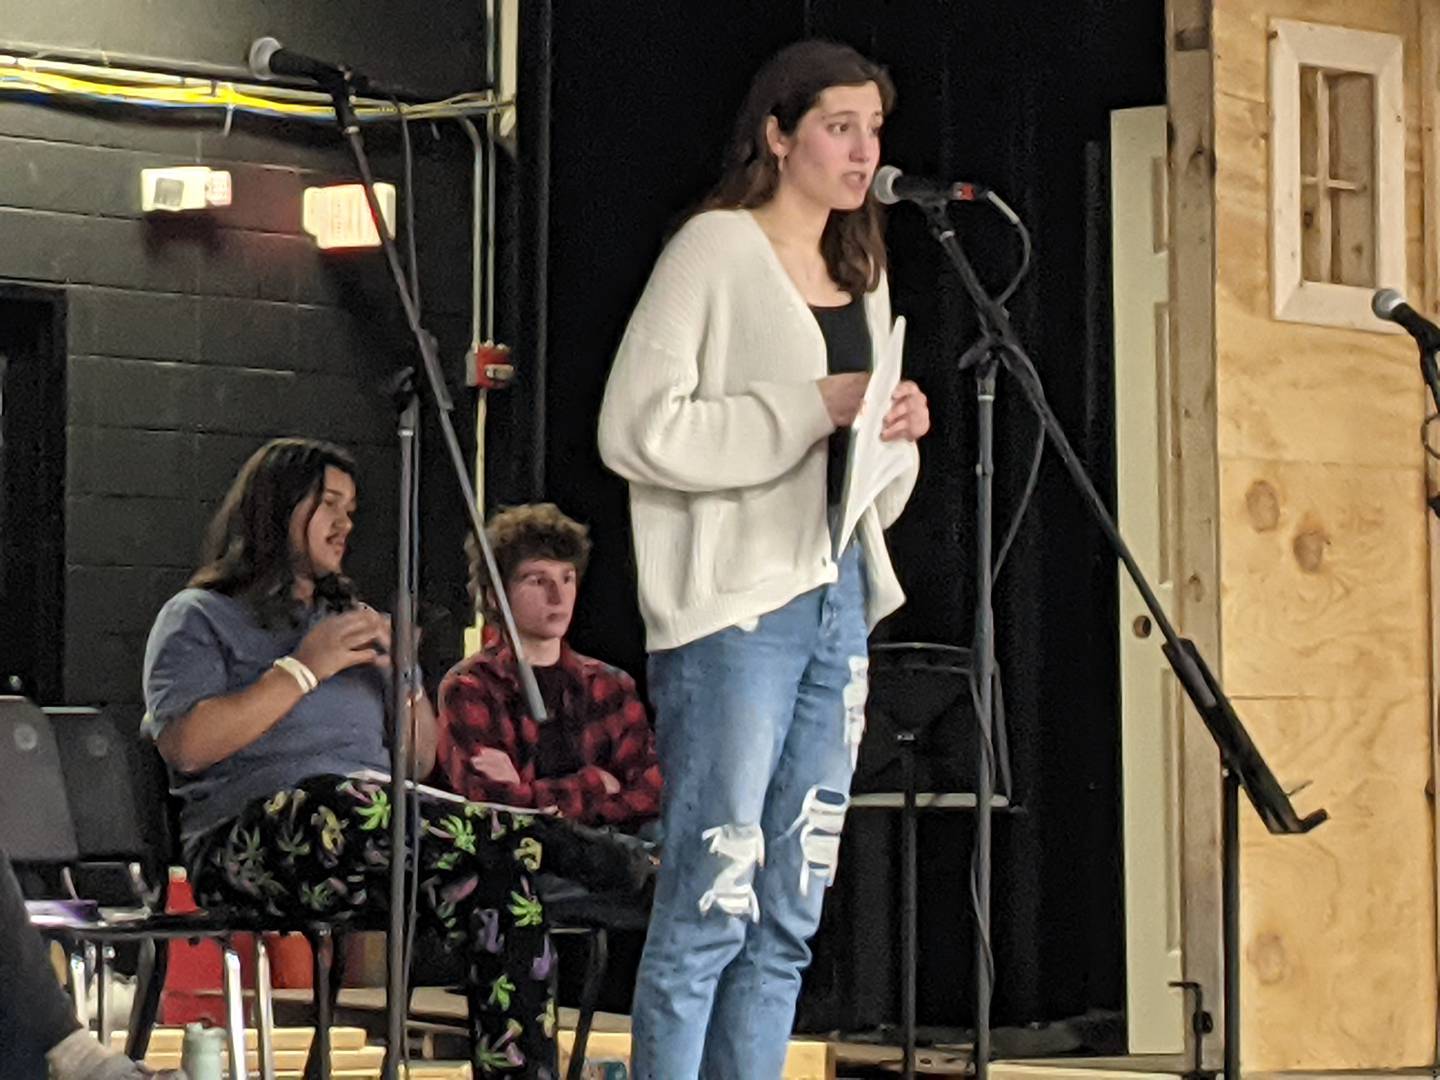 Sandwich High School junior Caroline Gomes, who is playing the title character in the upcoming production of "Cinderella," was rehearsing with her fellow cast members on March 7.